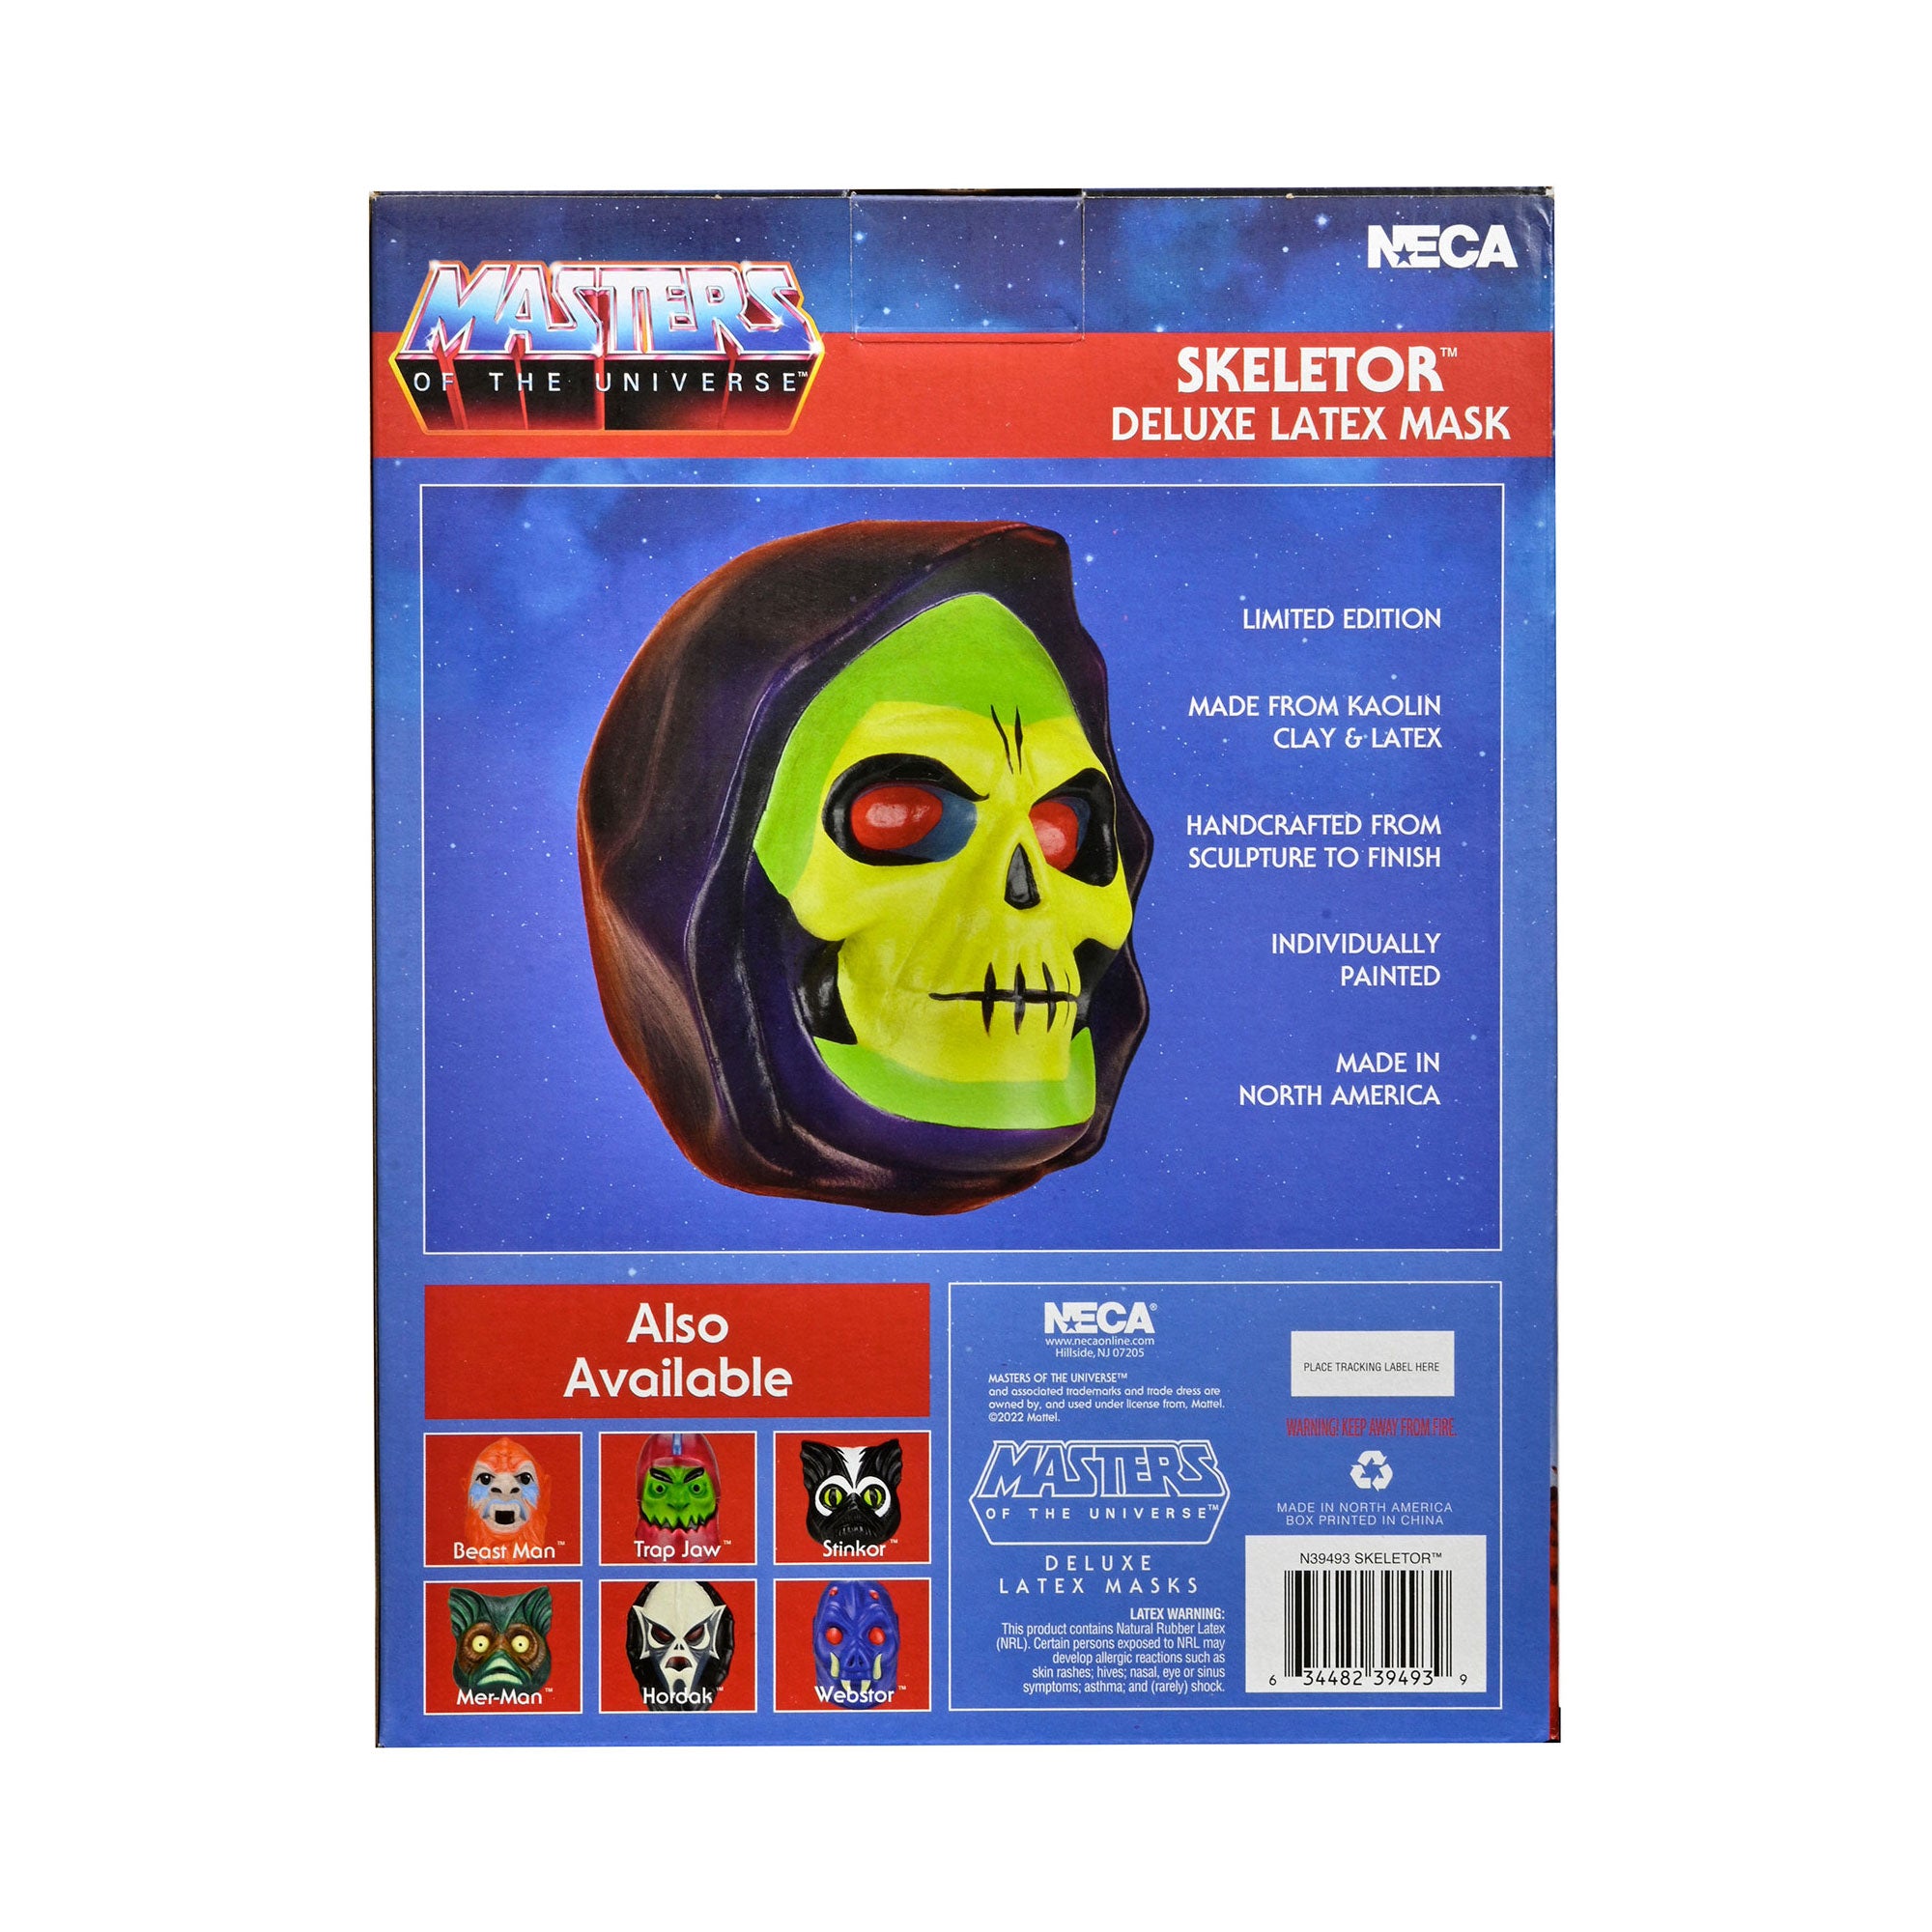 Masters of the Universe Skeletor Deluxe Latex Mask Packaging - Back of Box